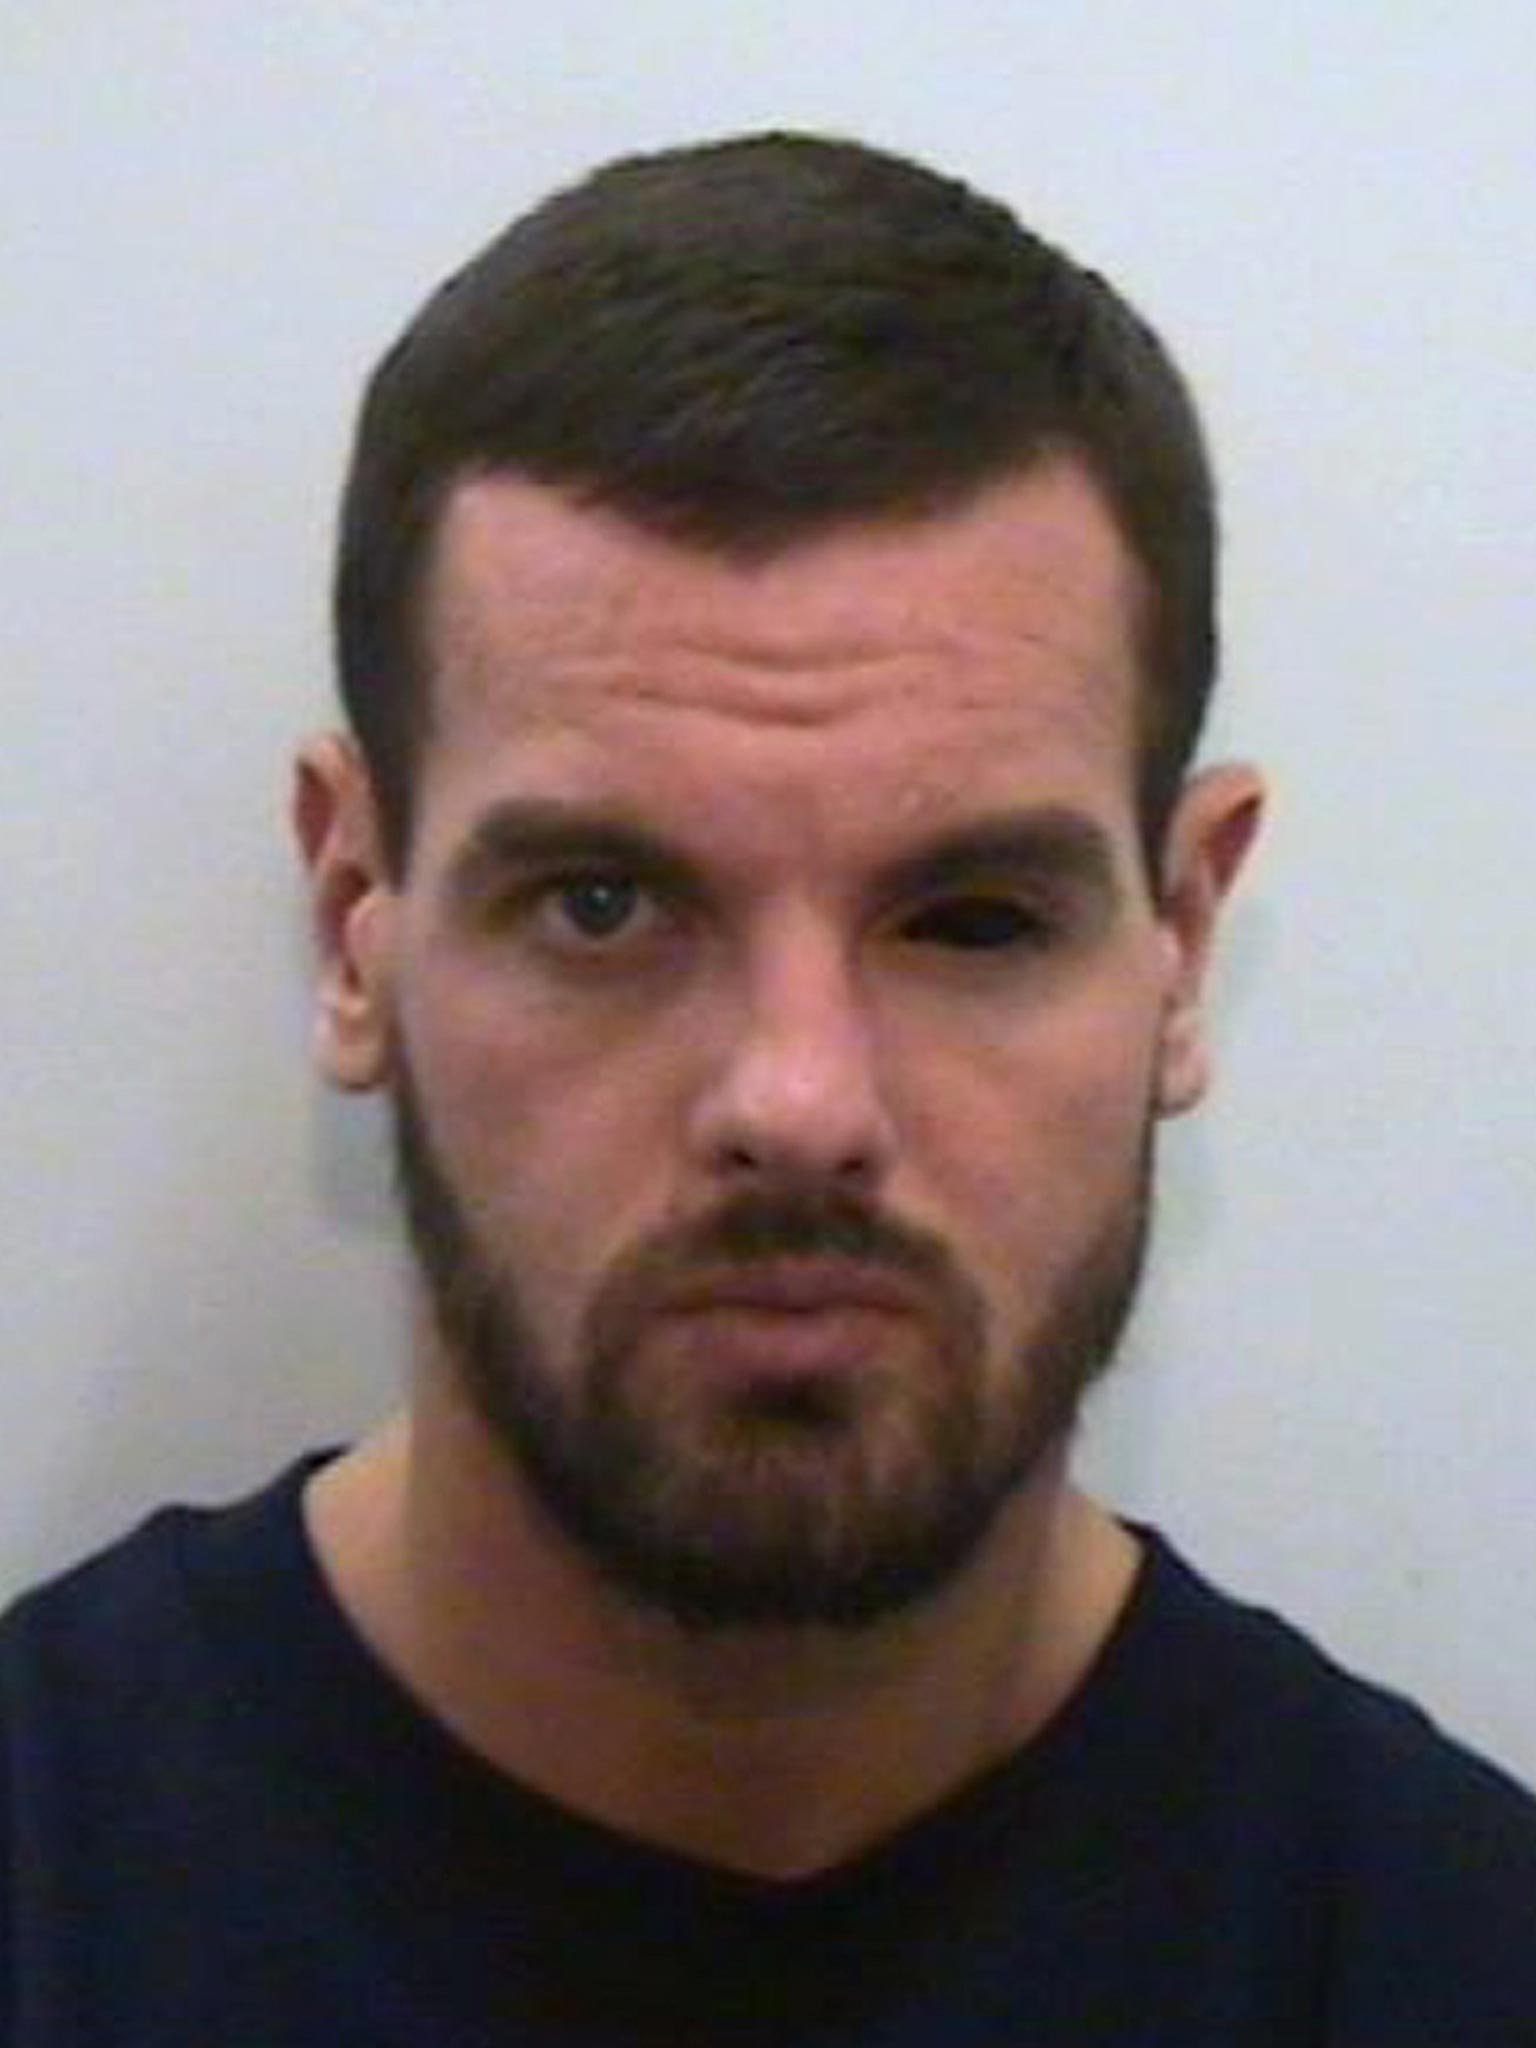 Dale Cregan is set to die in prison with a whole life sentence for murdering four people